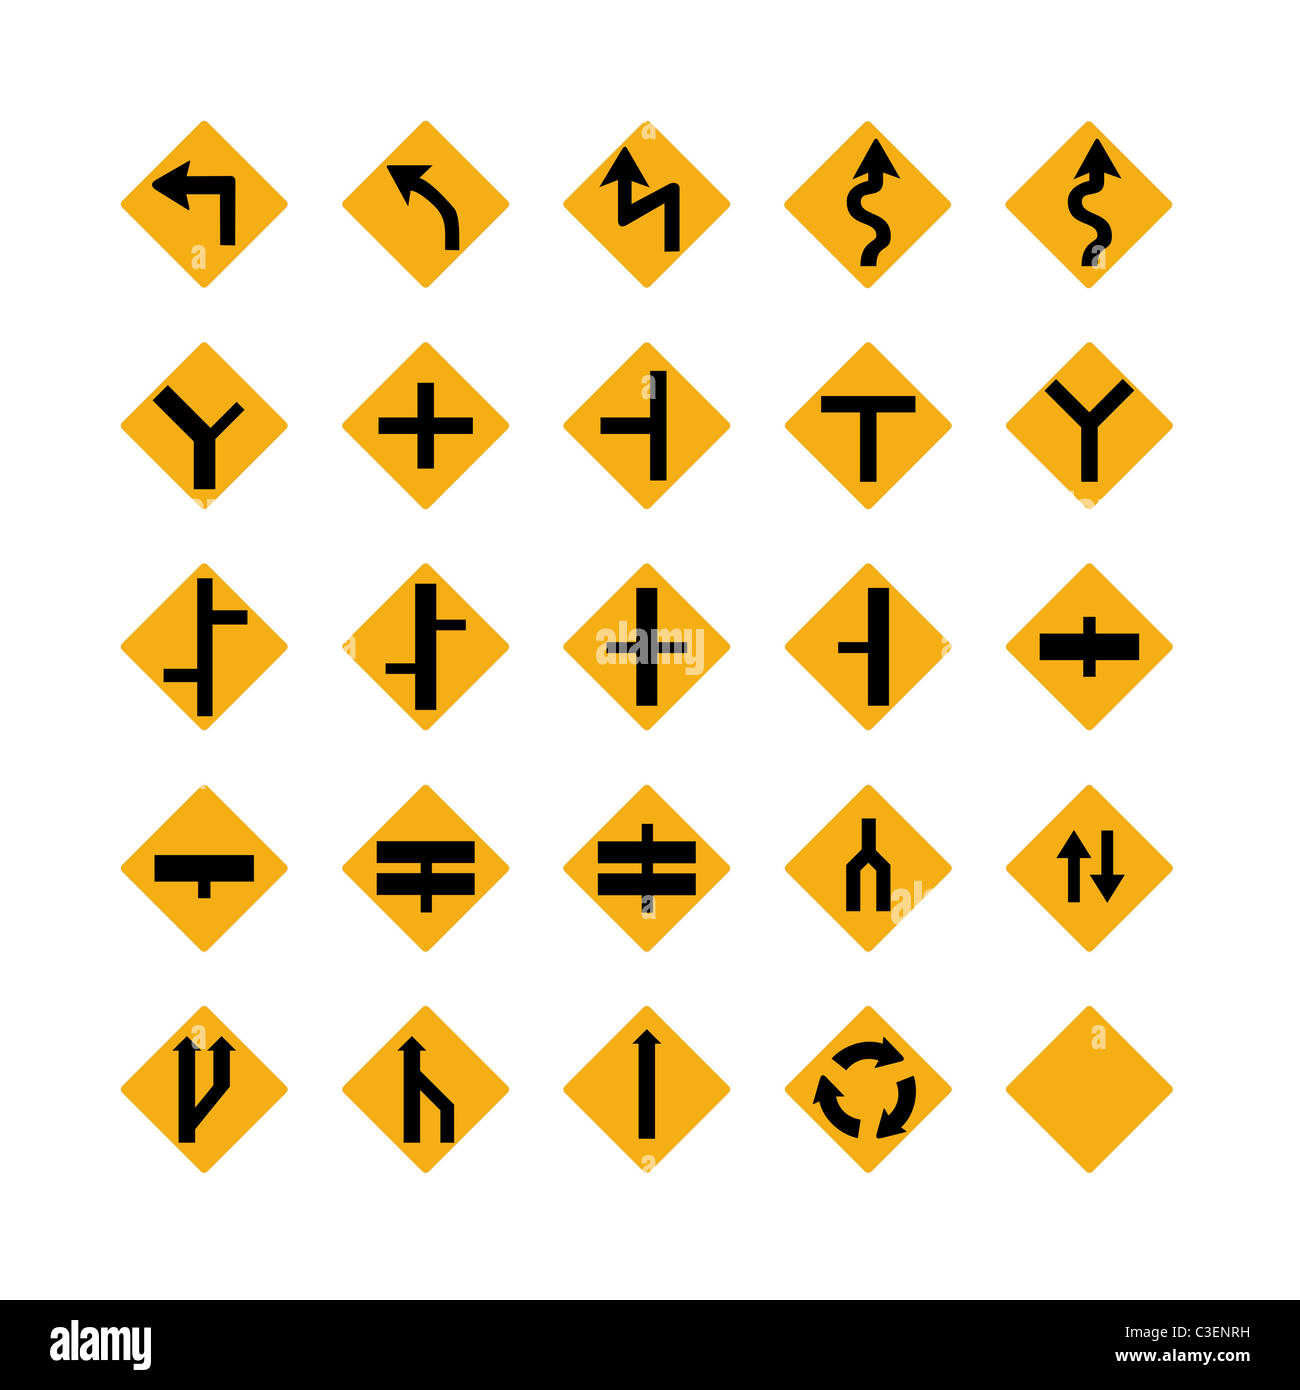 Illustrated set of amber traffic signs; isolated on white background Stock Photo